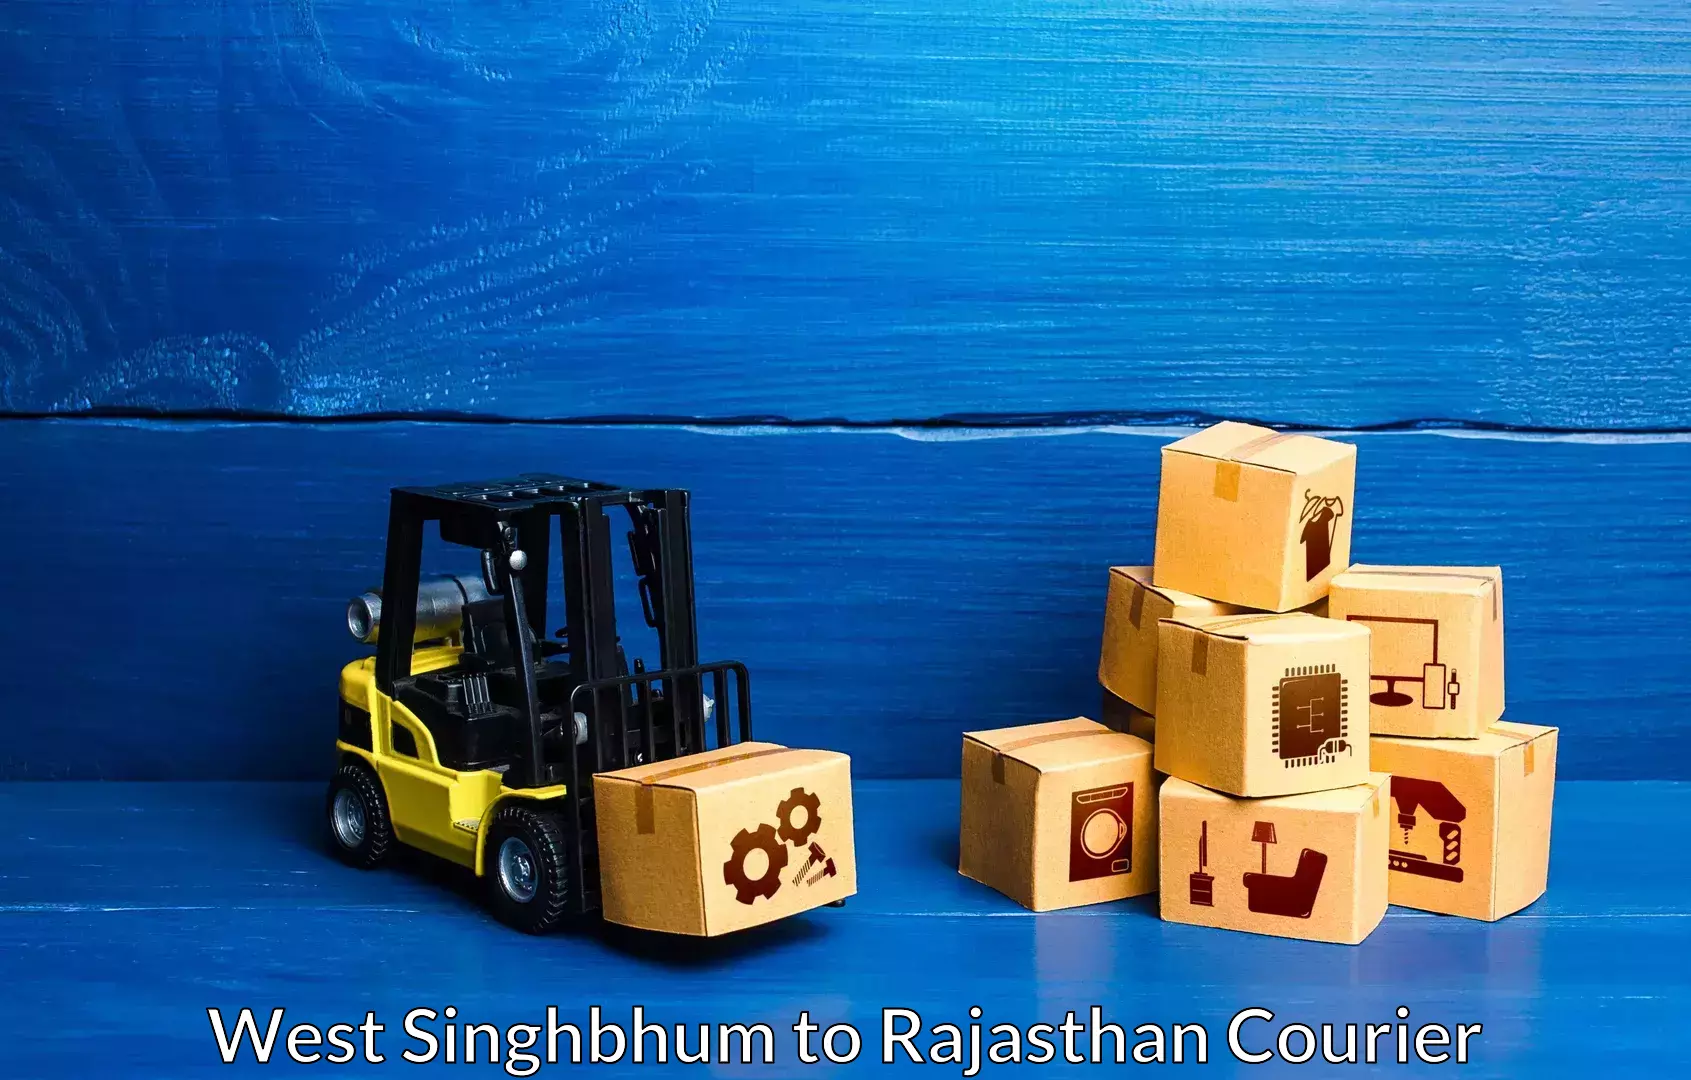 Quality relocation assistance in West Singhbhum to Ghatol